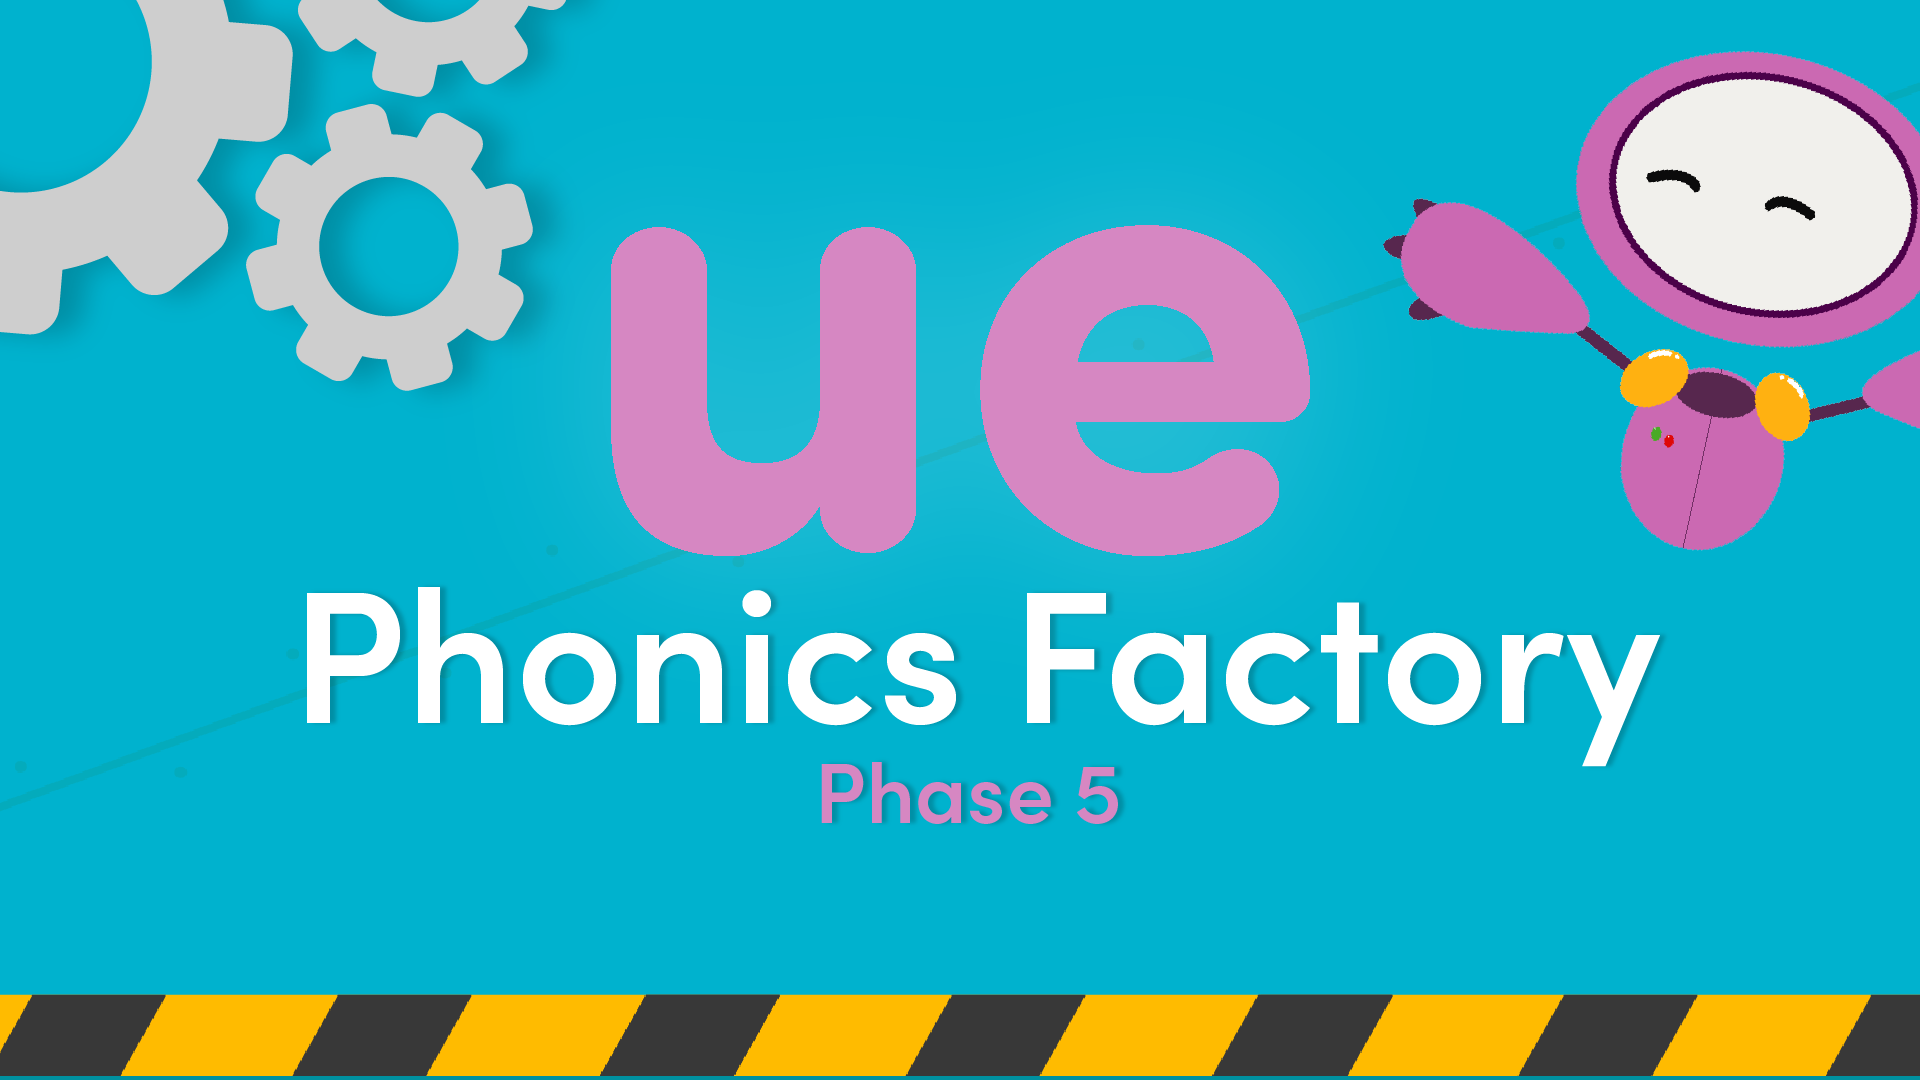 Phonics Phase 5 ue Sound Video in the Phonics Factory Classroom